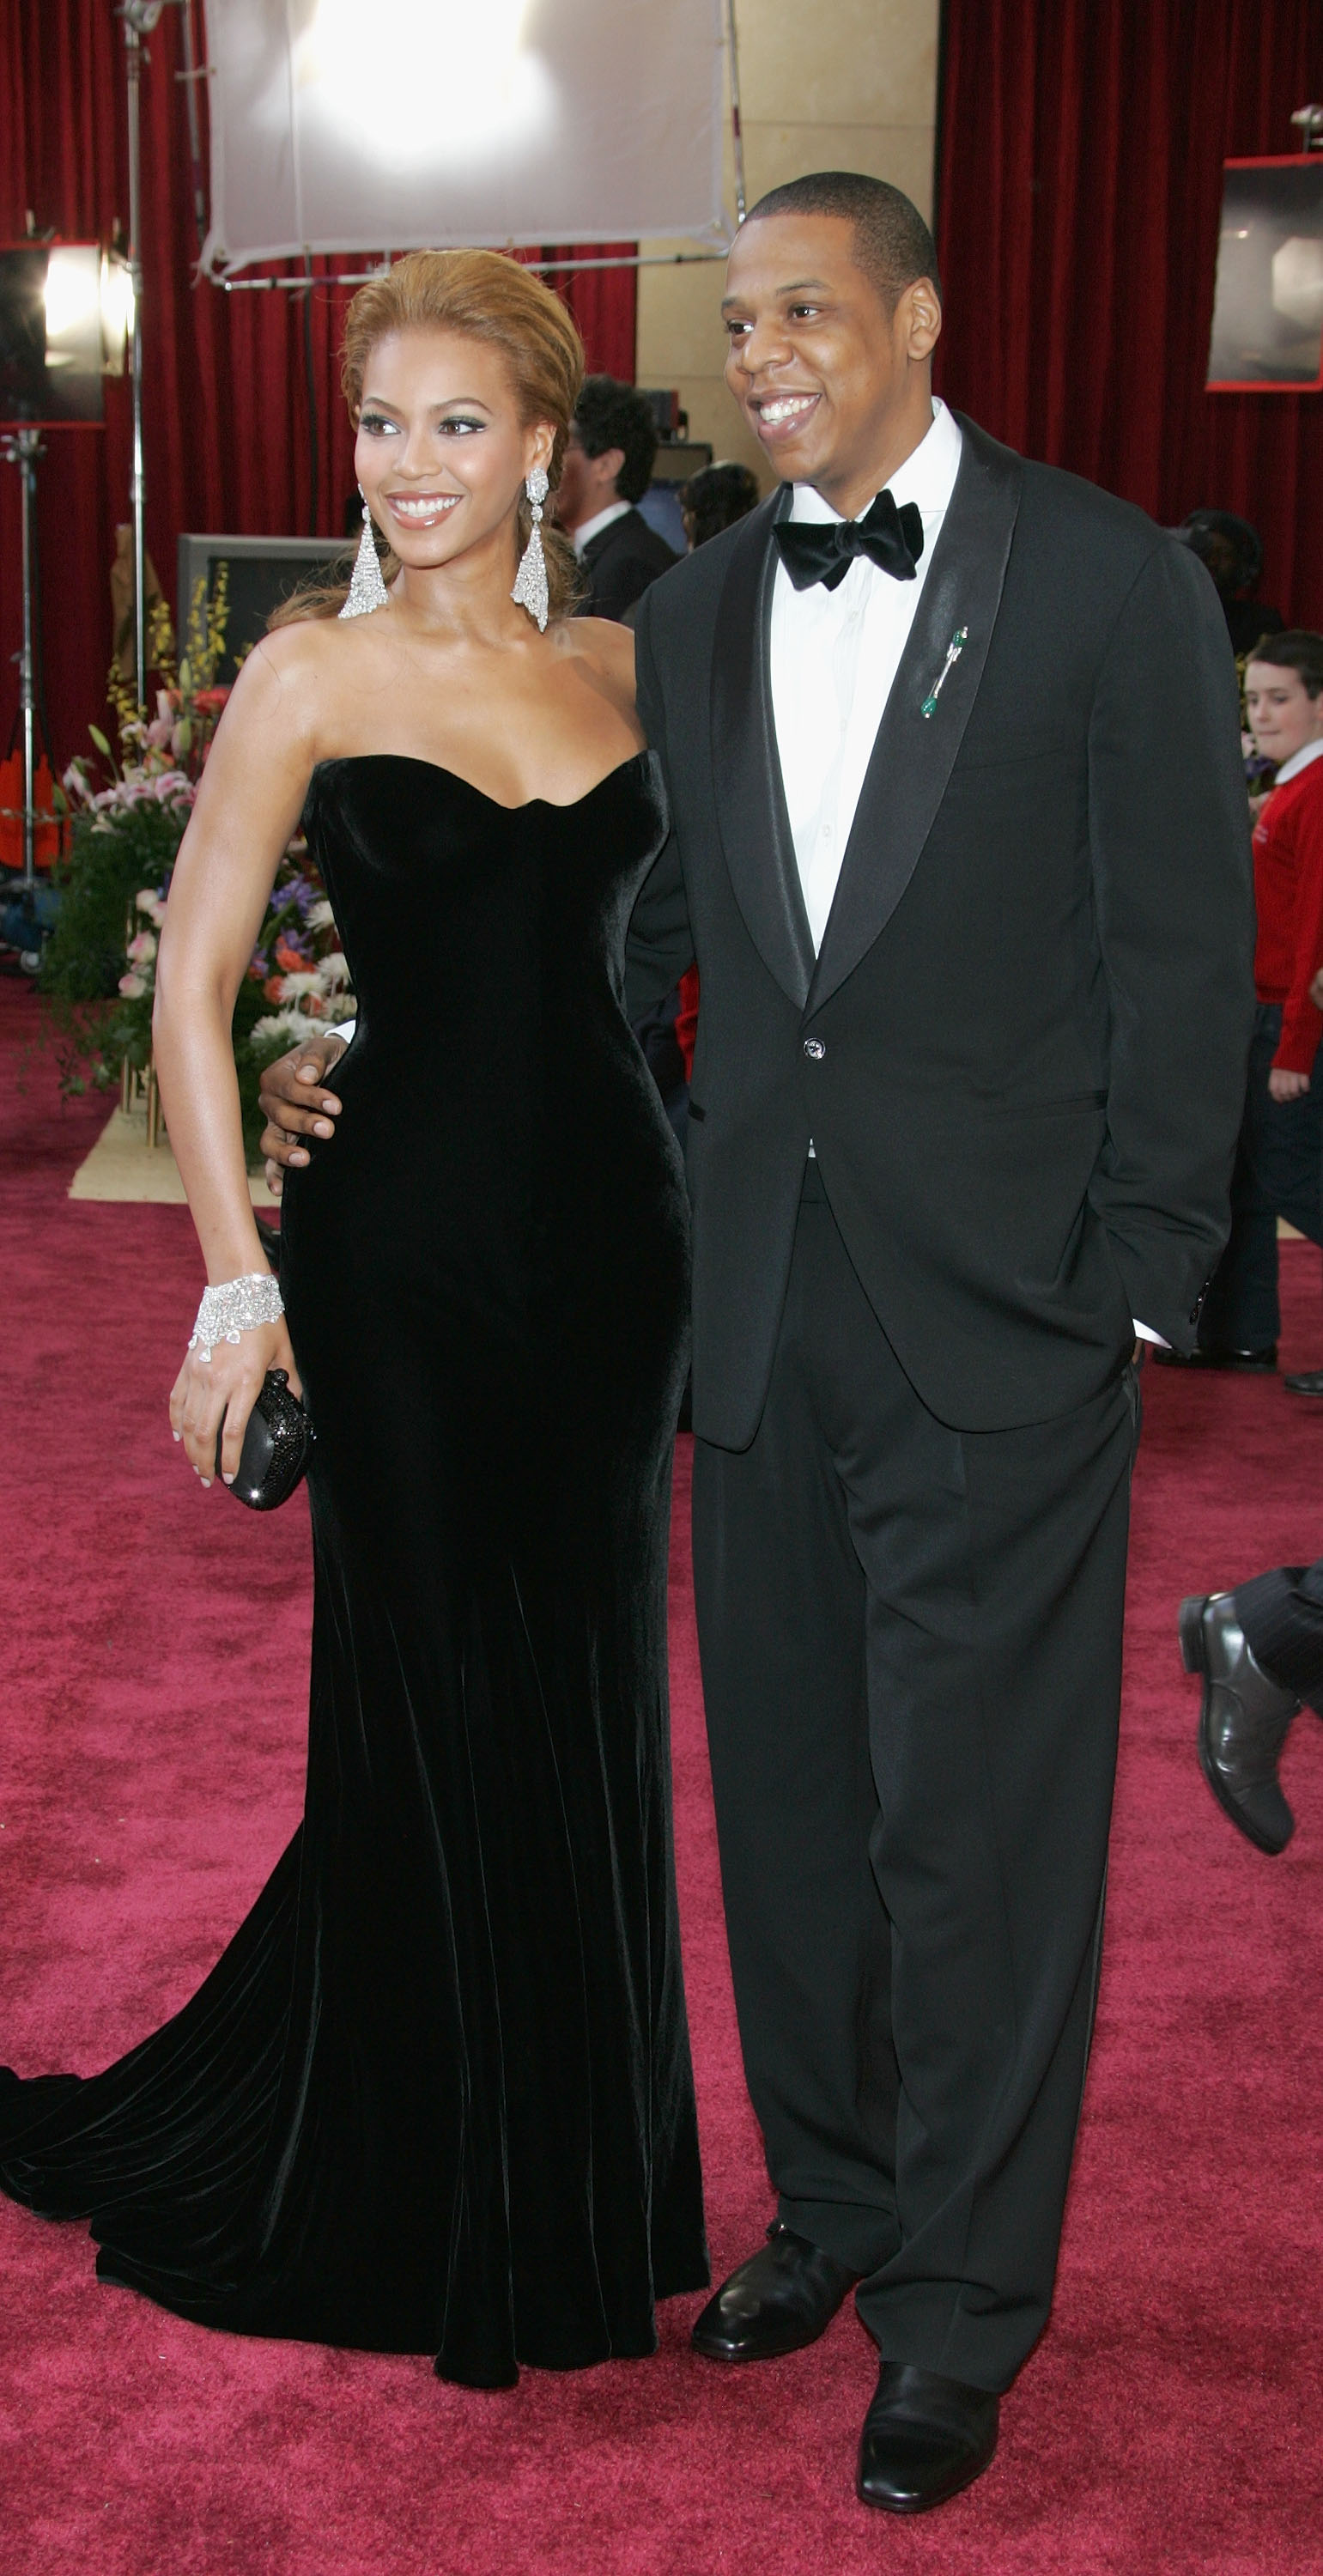 Singer Beyonce Knowles (L) and Def Jam President Jay-Z arrive at the 77th Annual Academy Awards on February 27, 2005. (Photo by Vince Bucci/Getty Images) (Vince Bucci—Getty Images)